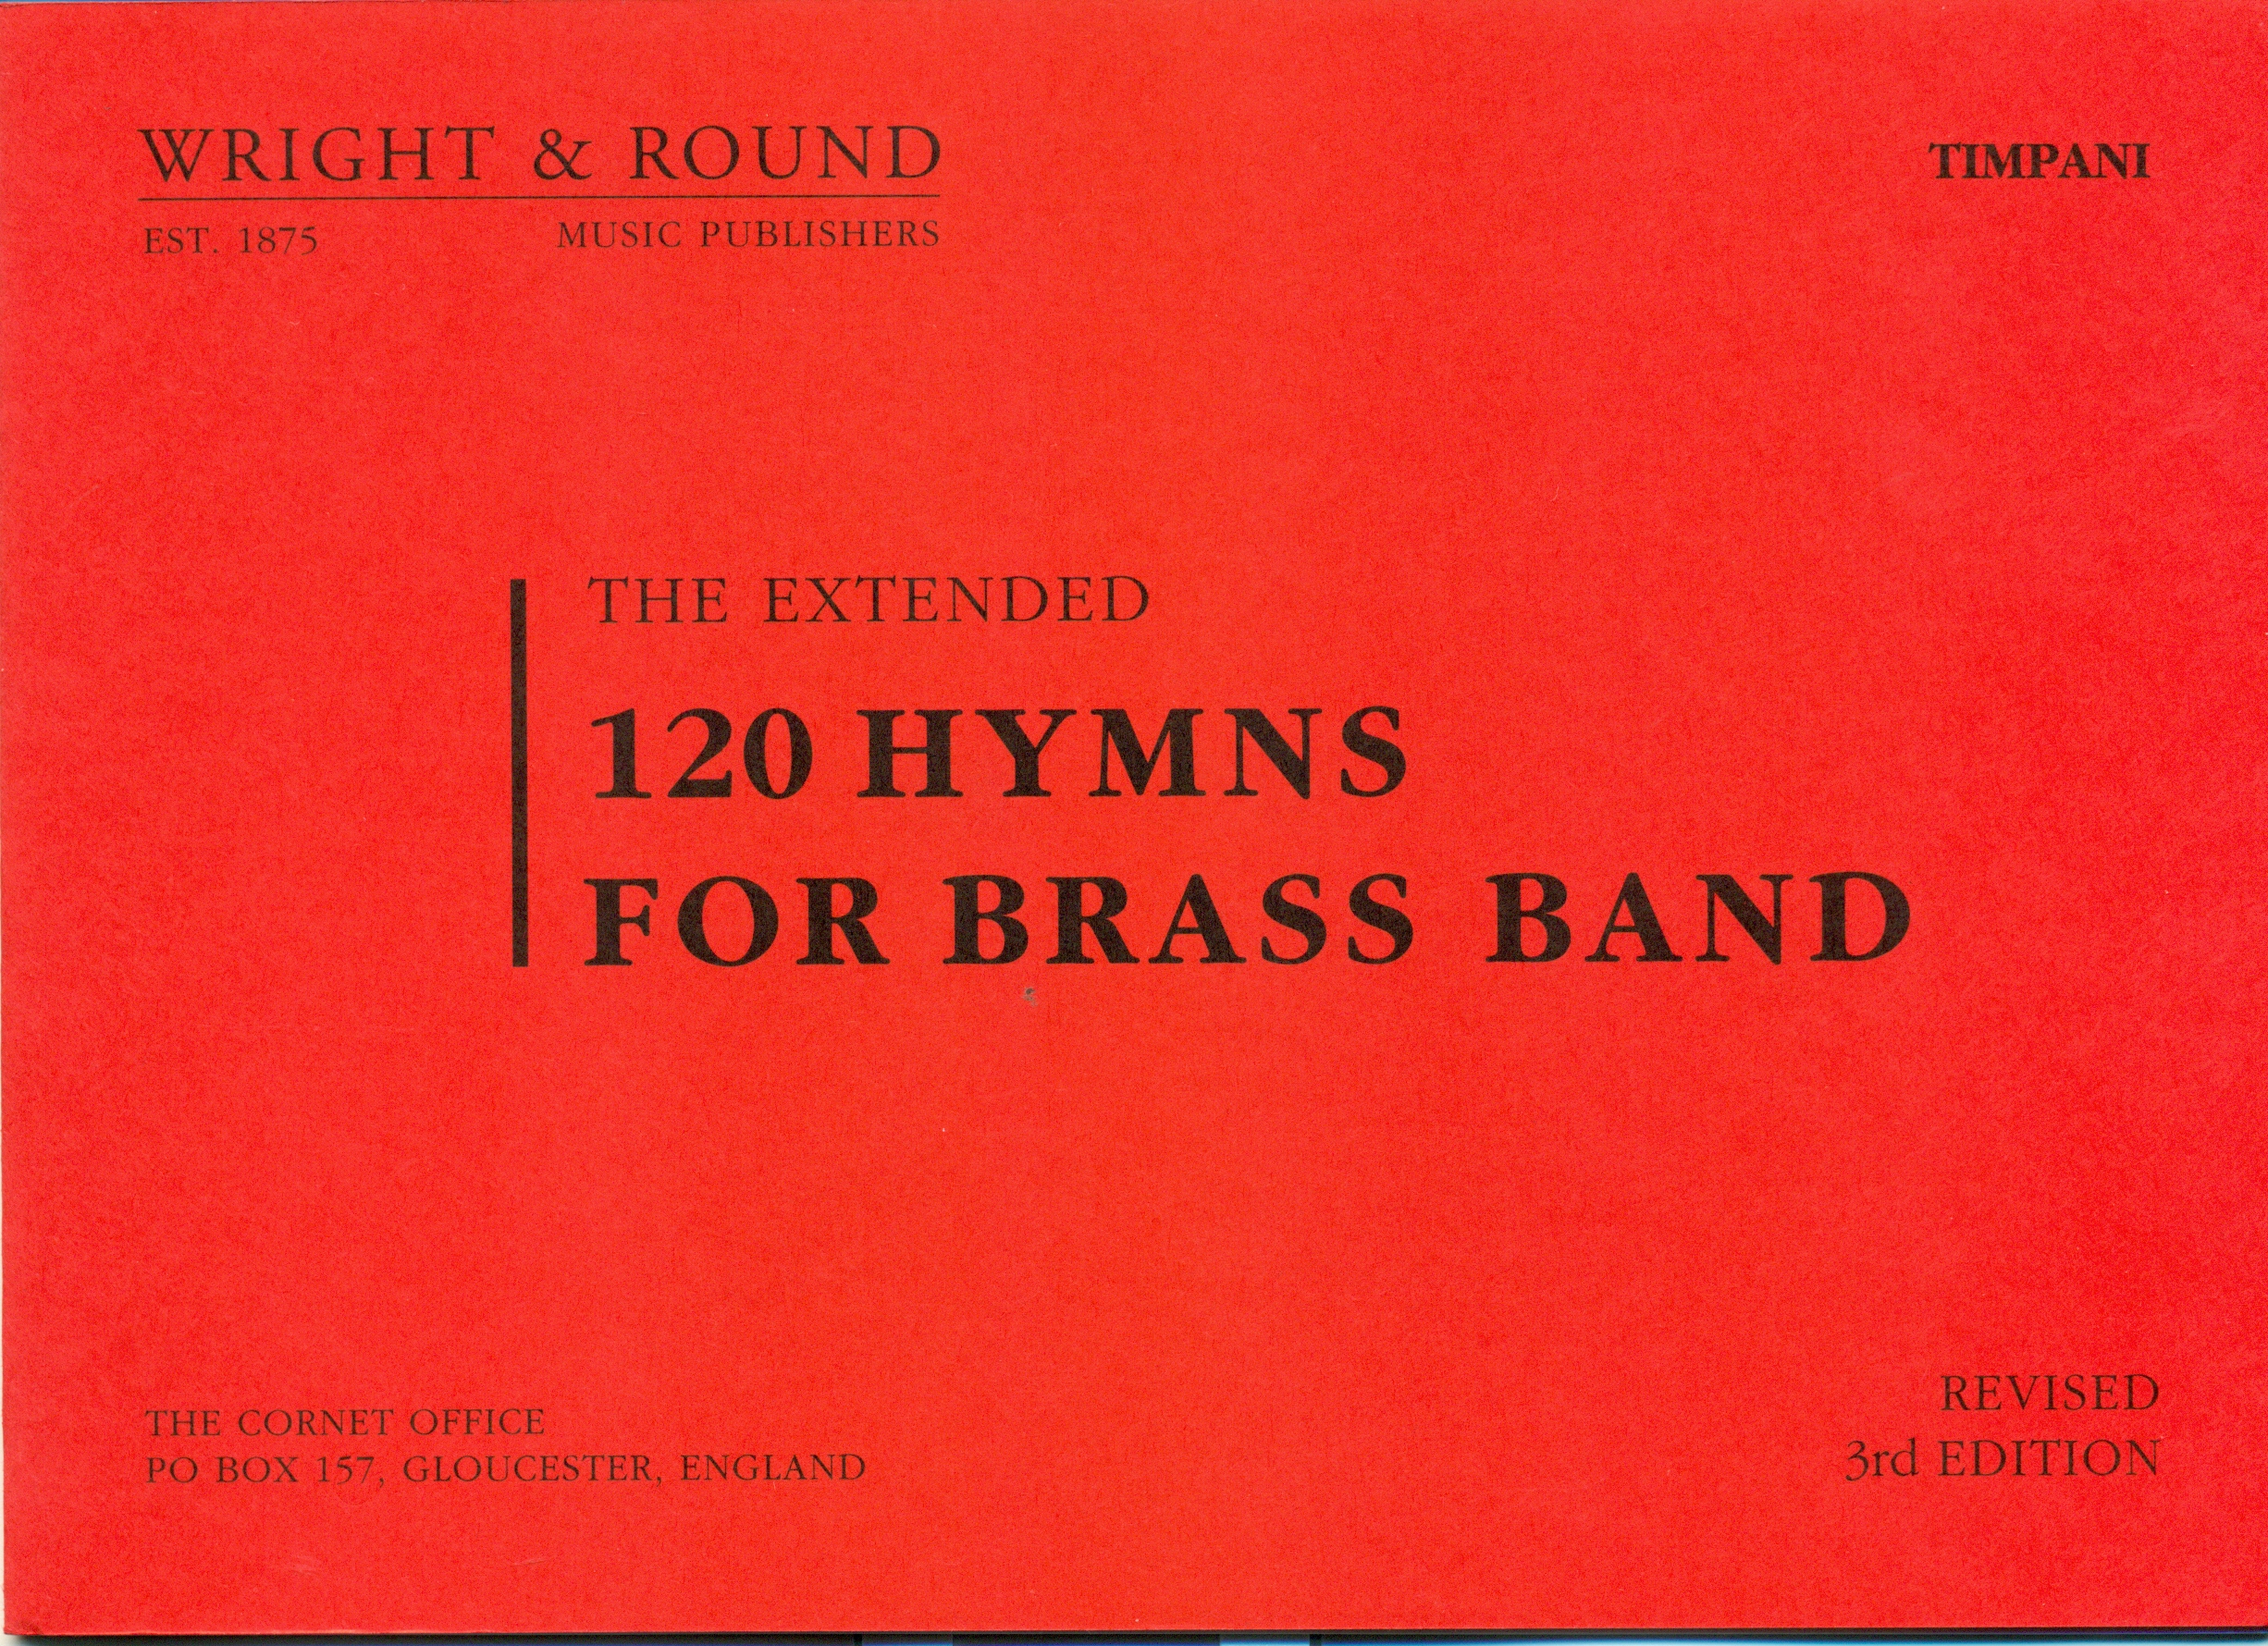 The Extended 120 Hymns for Brass Band – Timpani